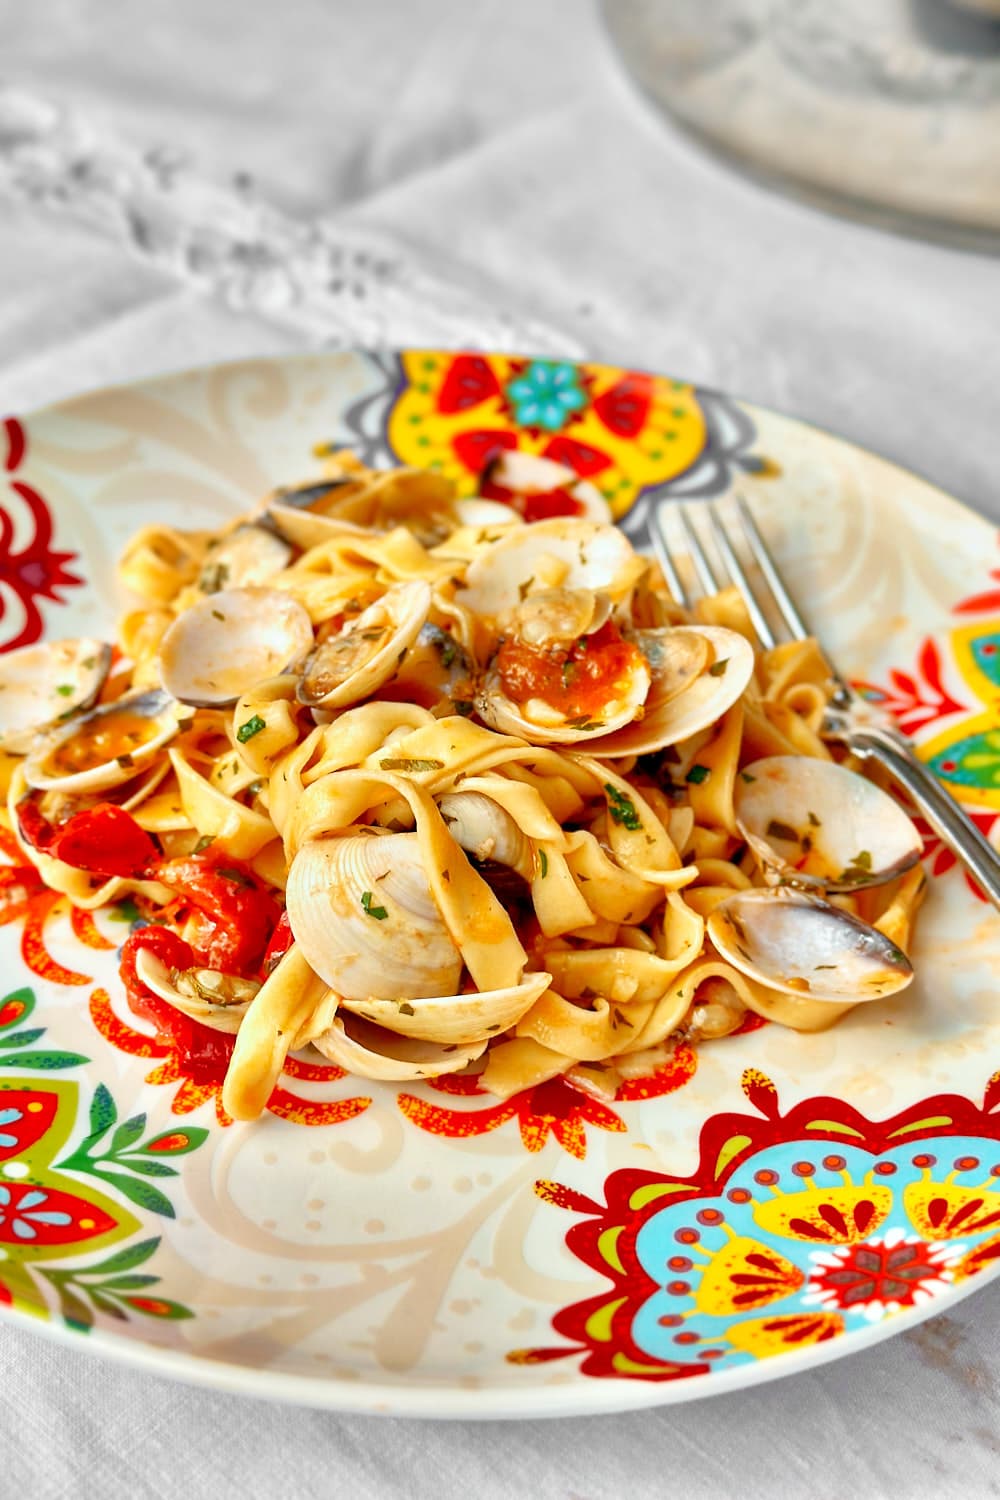 homemade tagliatelle pasta with clams on a plate with a mediterranean pattern.